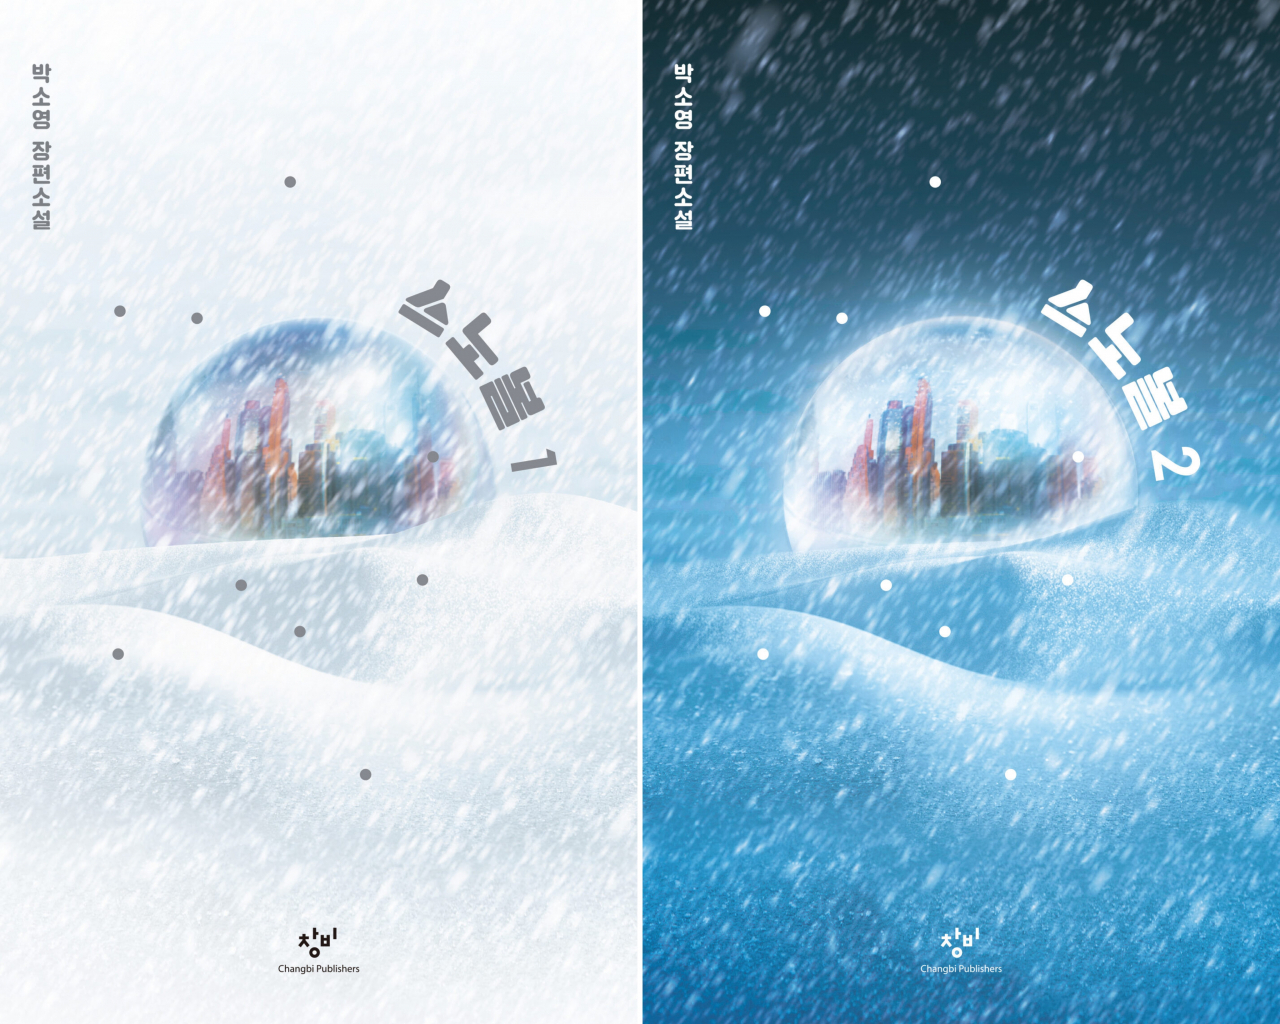 “Snowglobe” by Park So-young (Changbi Publishers)